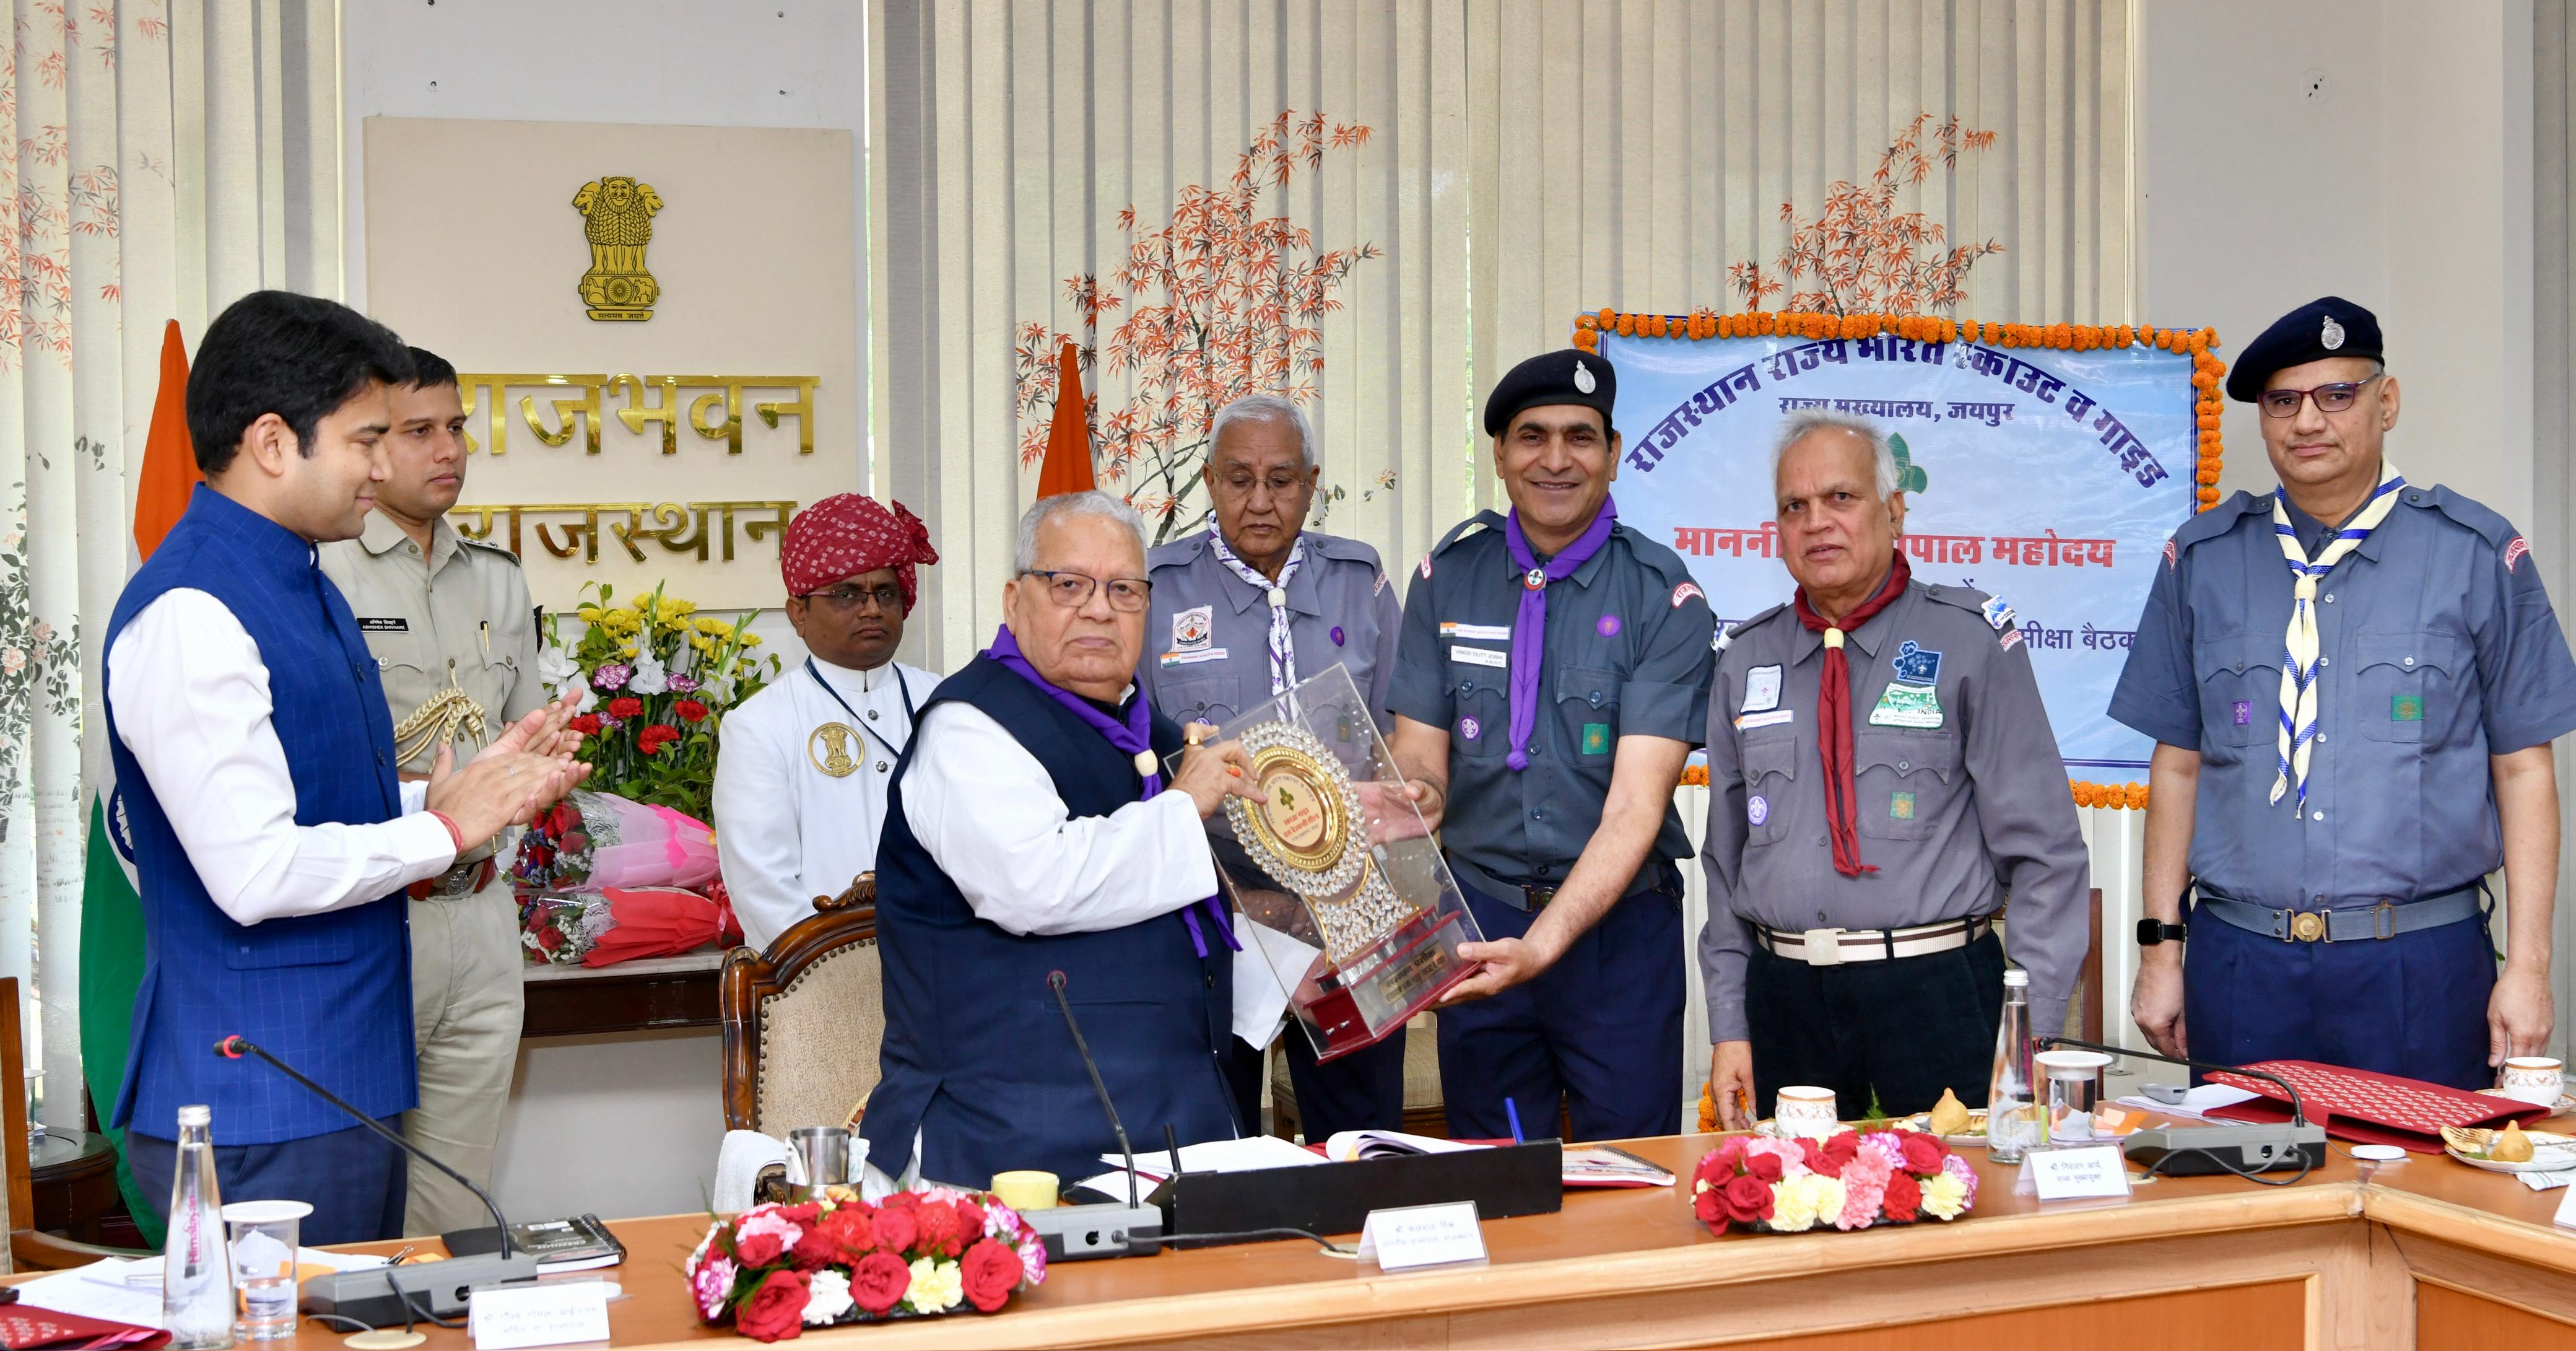 Hon'ble Governor has chaired special meeting of Rajasthan State Bharat Scout and Guide at Rajbhawan Jaipur